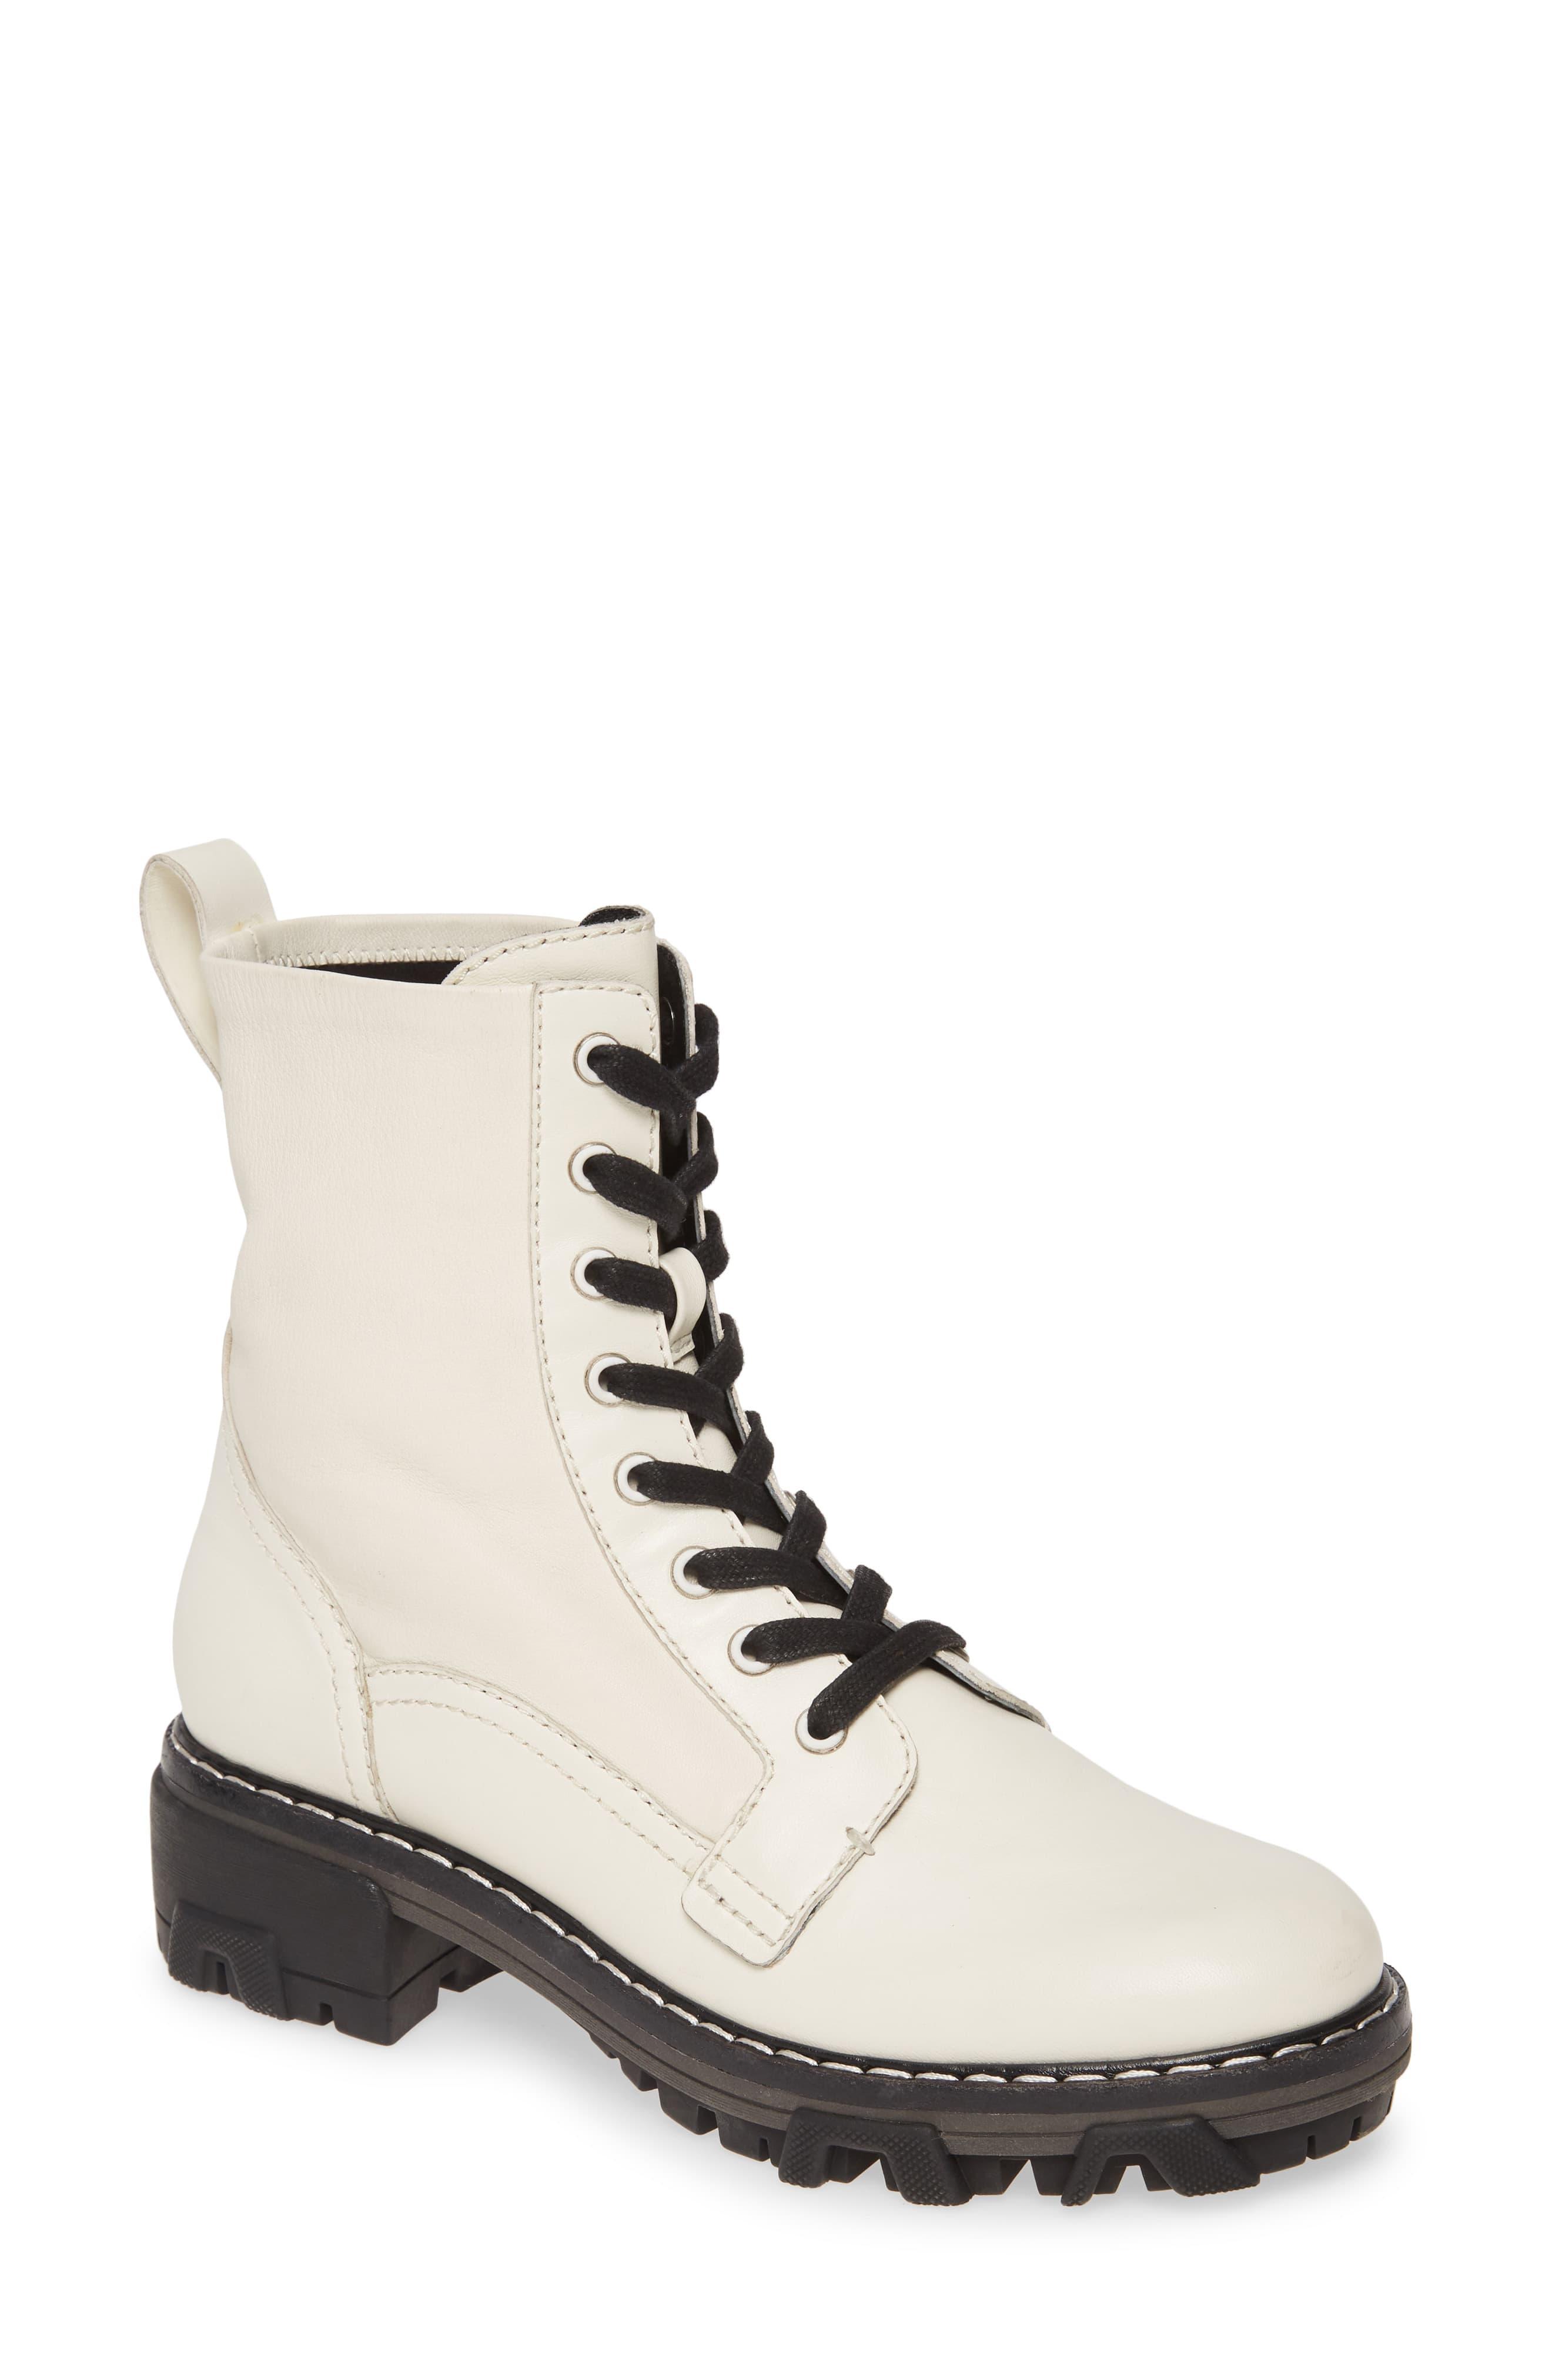 Rag & Bone Shiloh Boot - Leather Combat Ankle Boot in Antique White ...